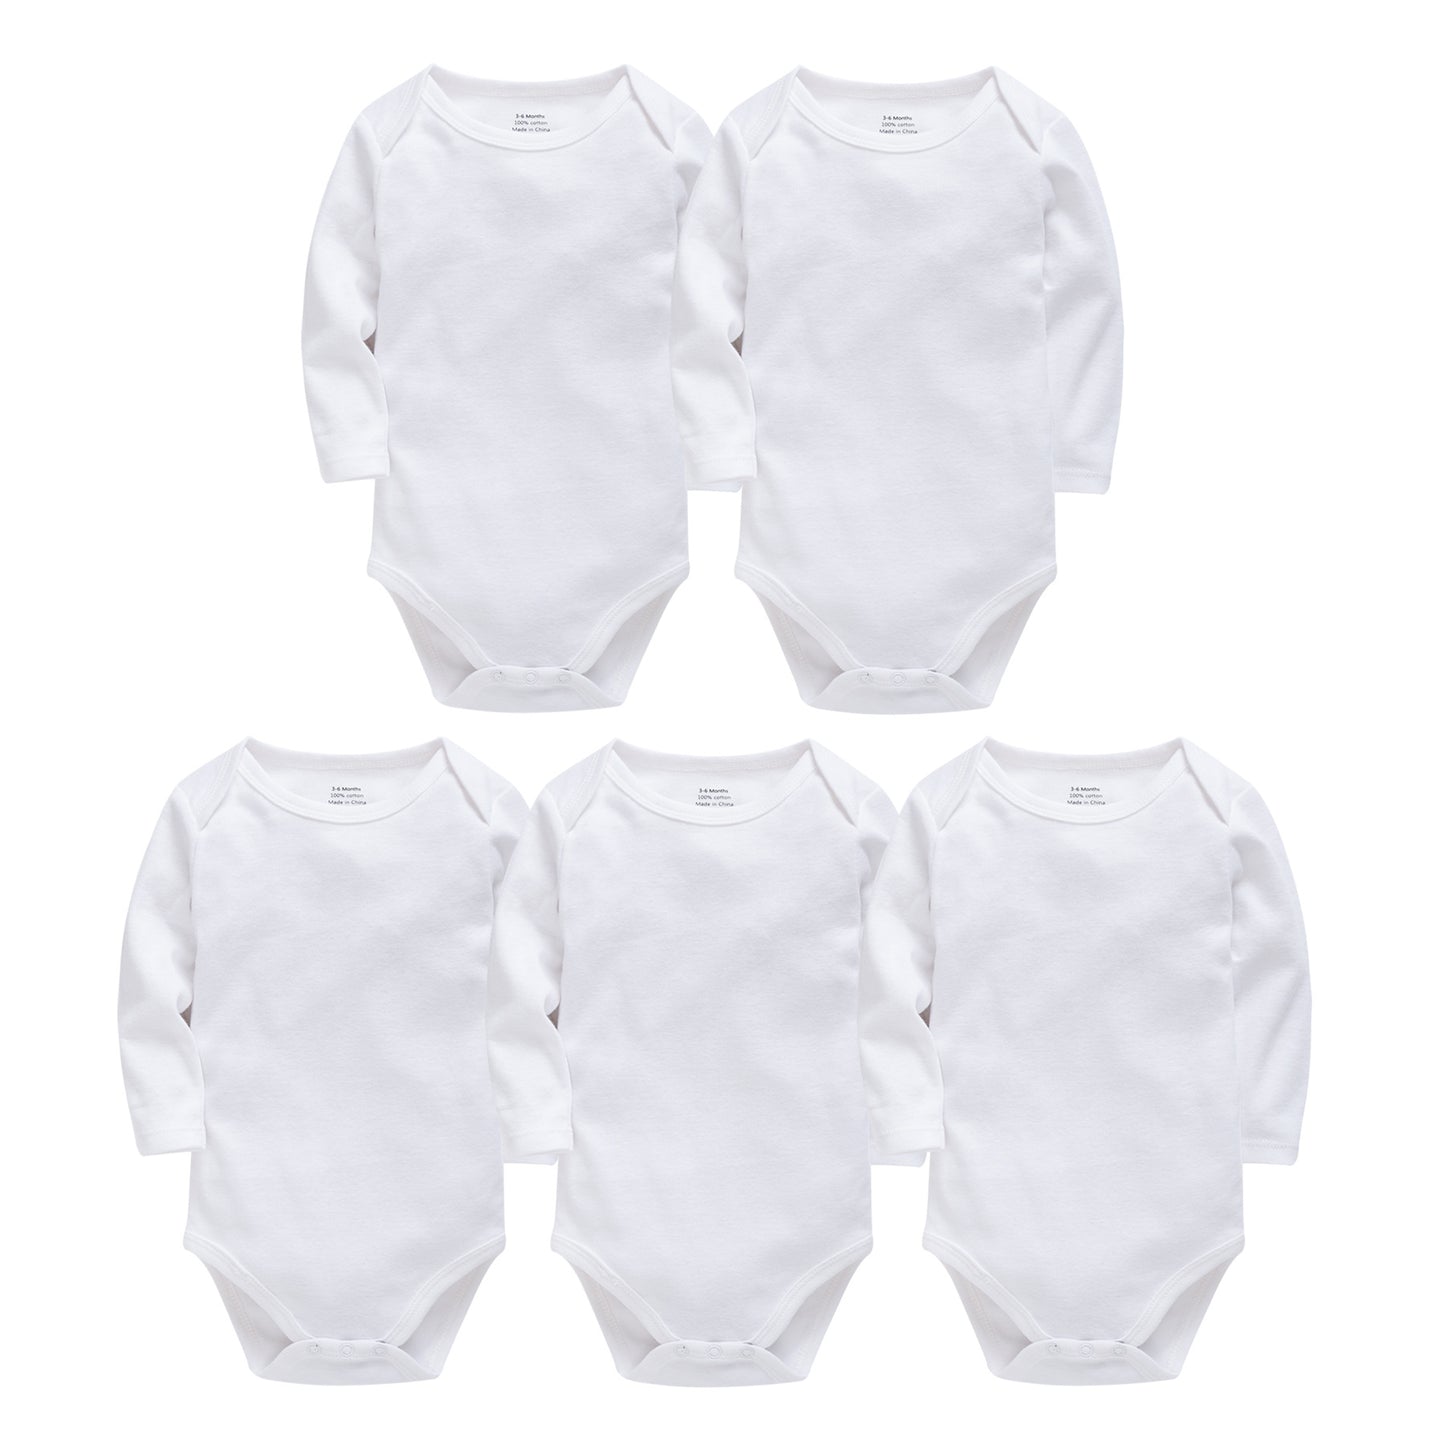 Baby Onesies, Pure Cotton Long-sleeved Solid Color Baby Romper